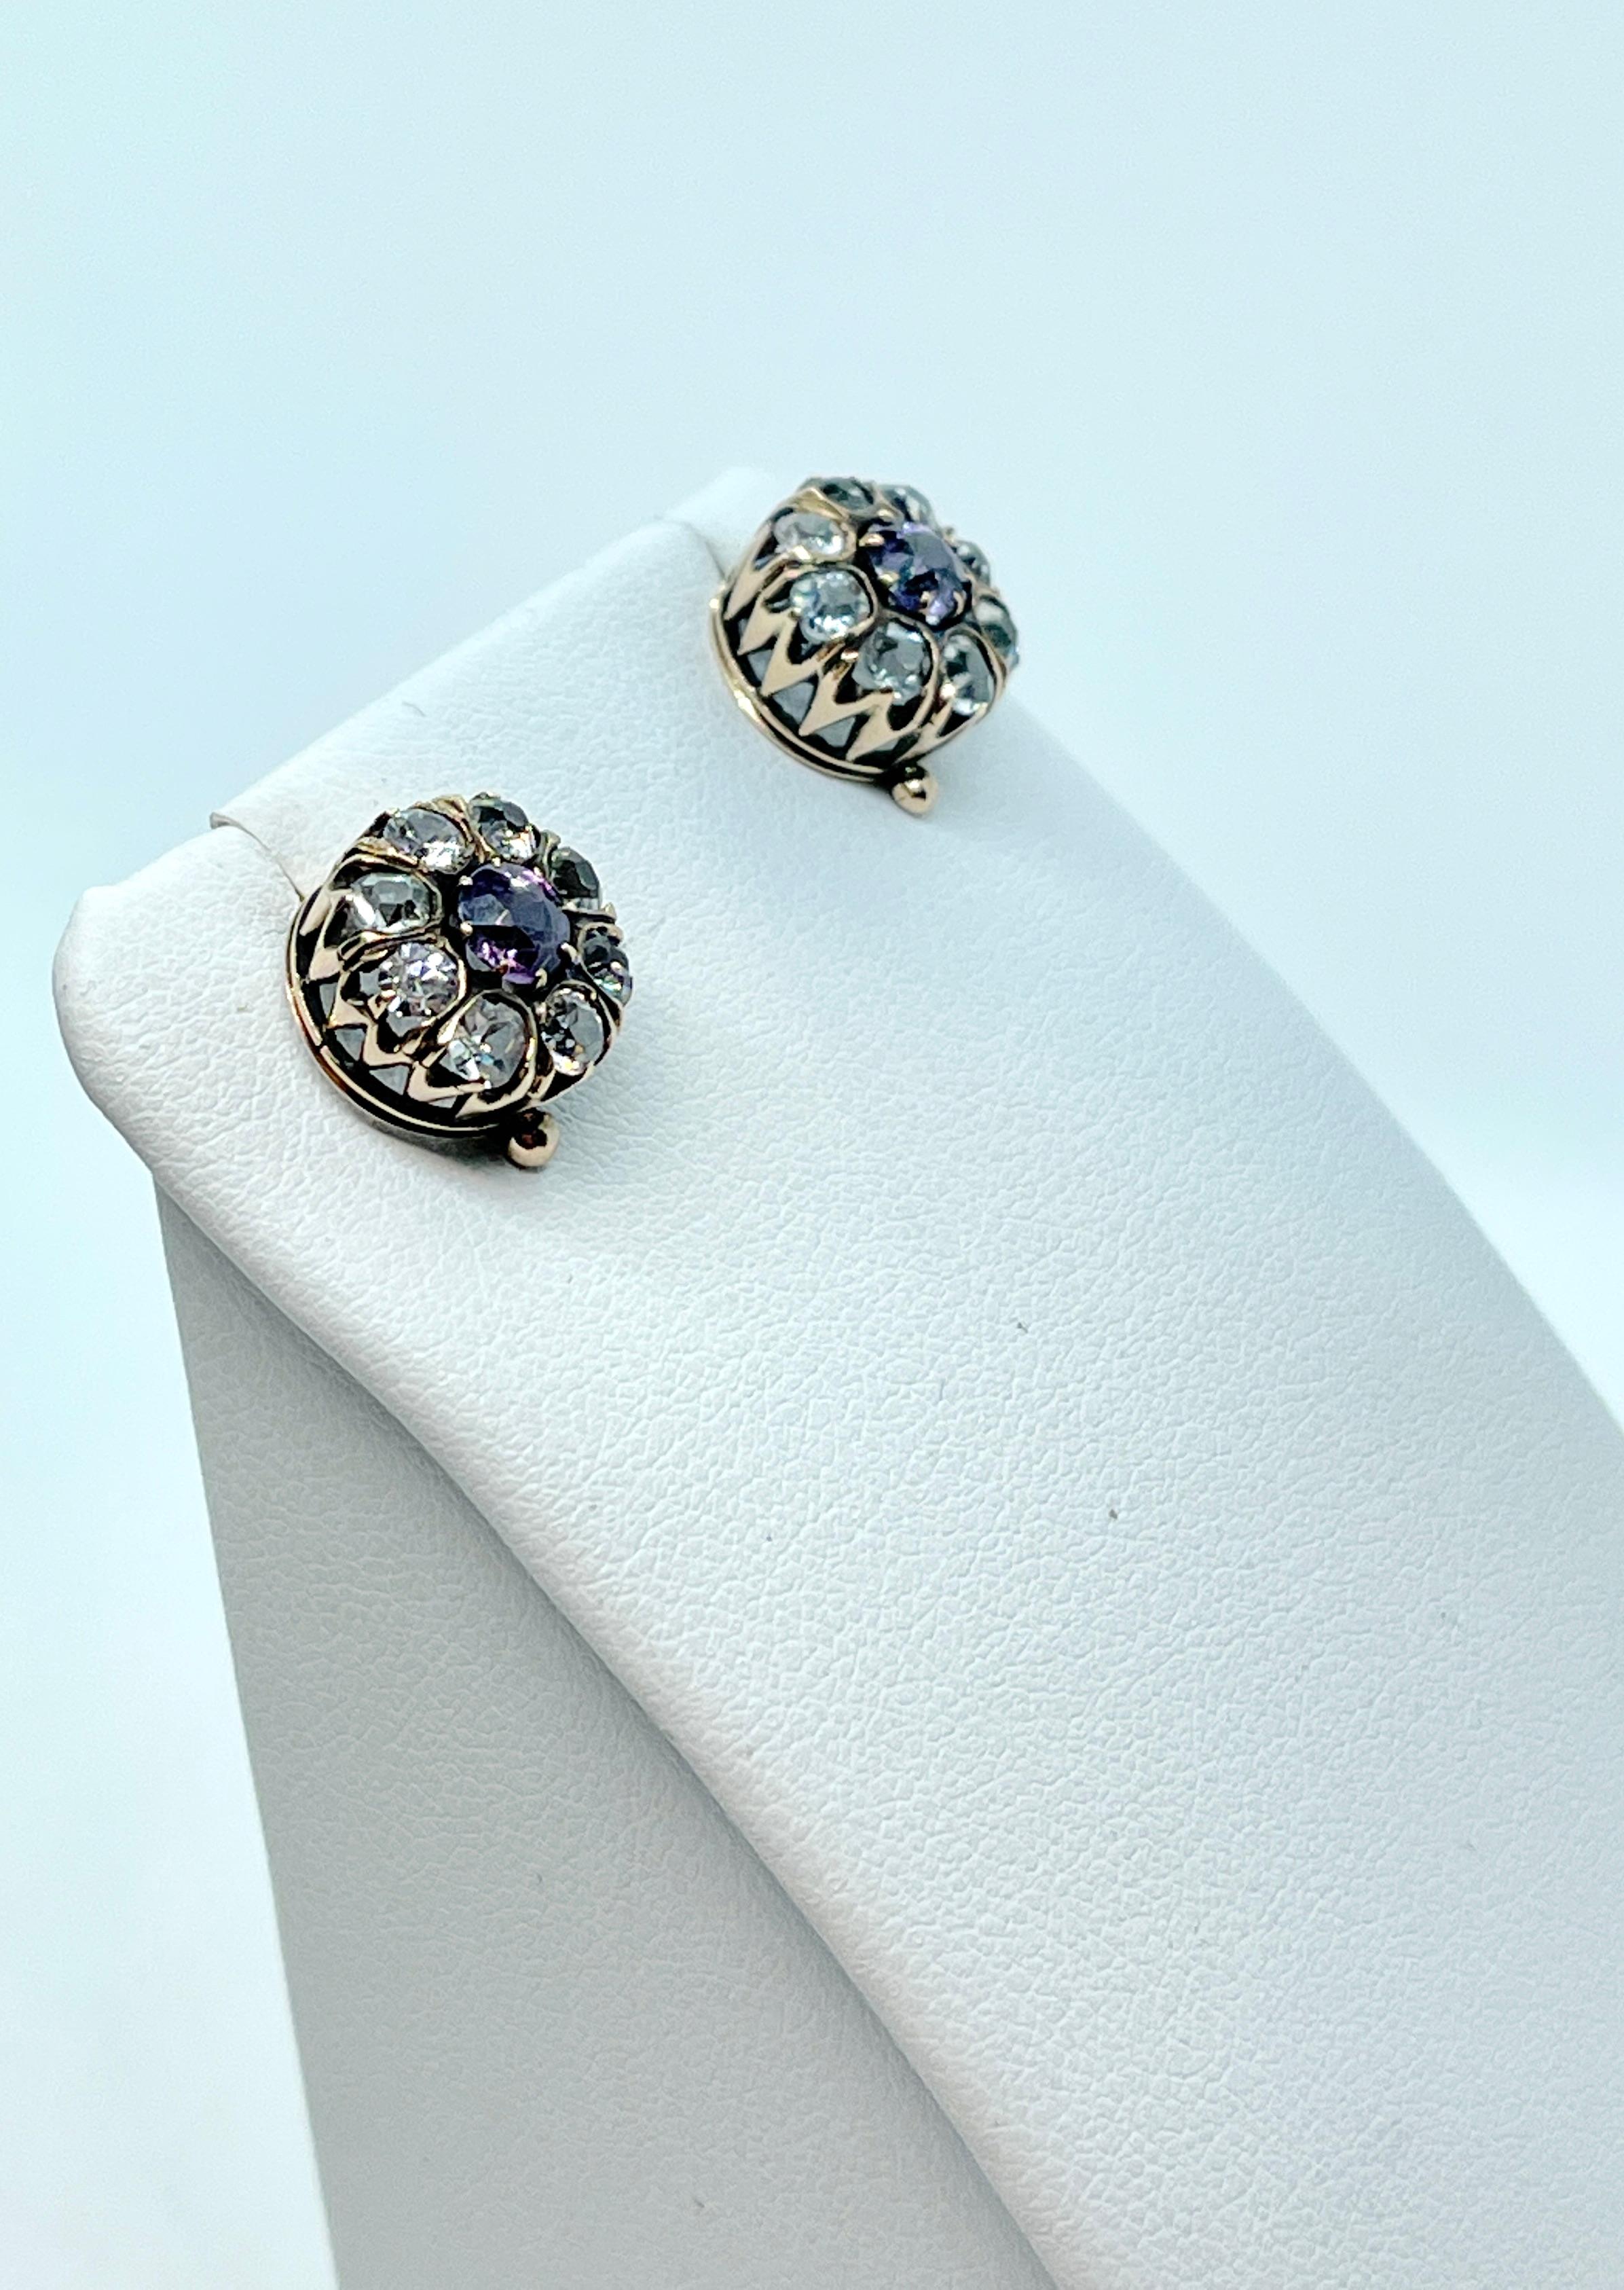 Antique 10ct Rose Gold Alexandrite Dormeuse Earrings Circa 1920s Valued $3150 For Sale 1